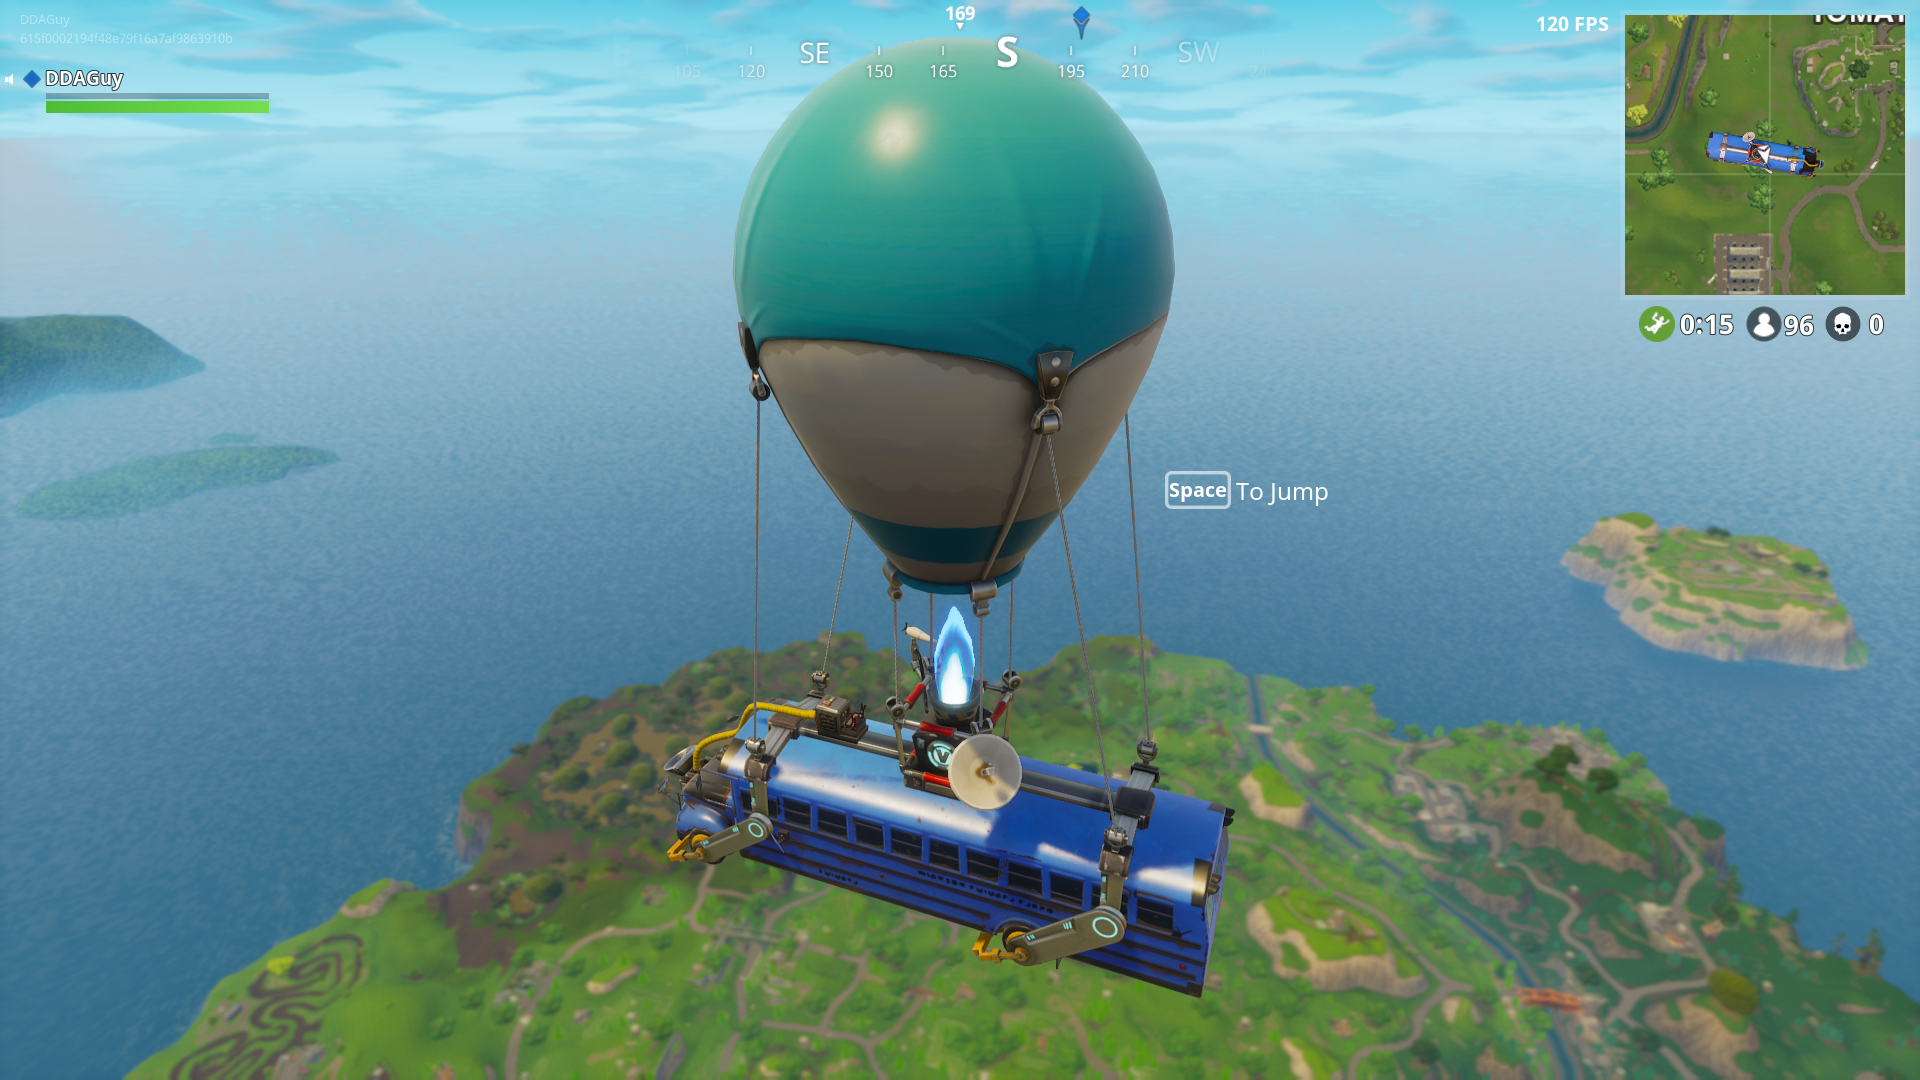 Free download i made the battle bus from fortnite battle royale out lego x for your desktop mobile tablet explore battle bus wallpapers school bus wallpaper vw bus